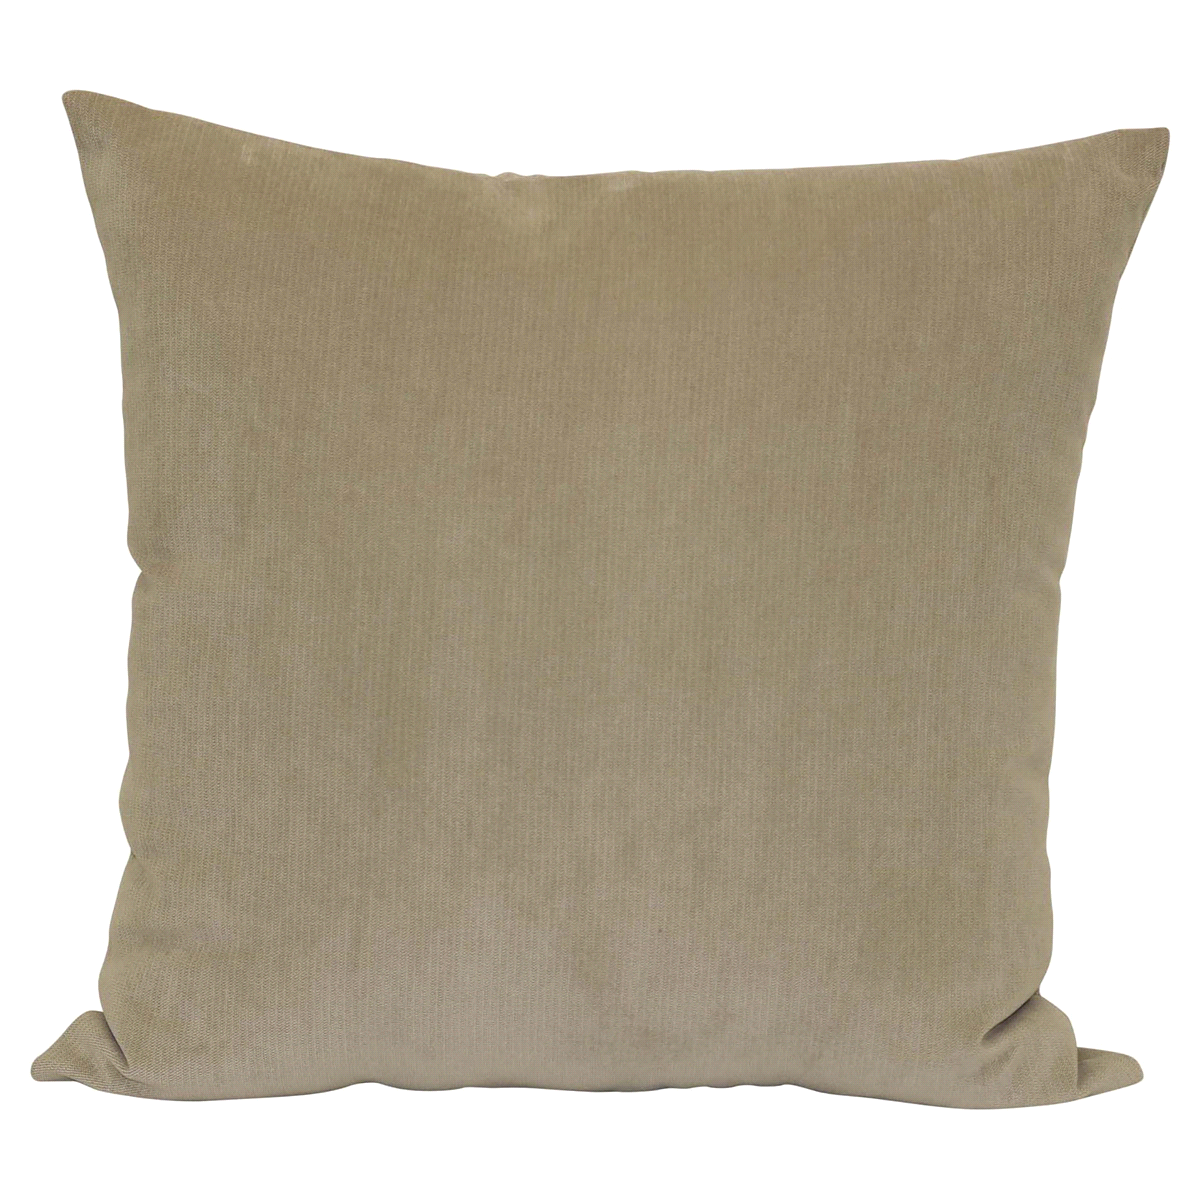 slide 1 of 1, Brentwood Originals Decorative Pillow, Cheyenne Feather Grey, 18 in x 18 in, 18 in x 18 in